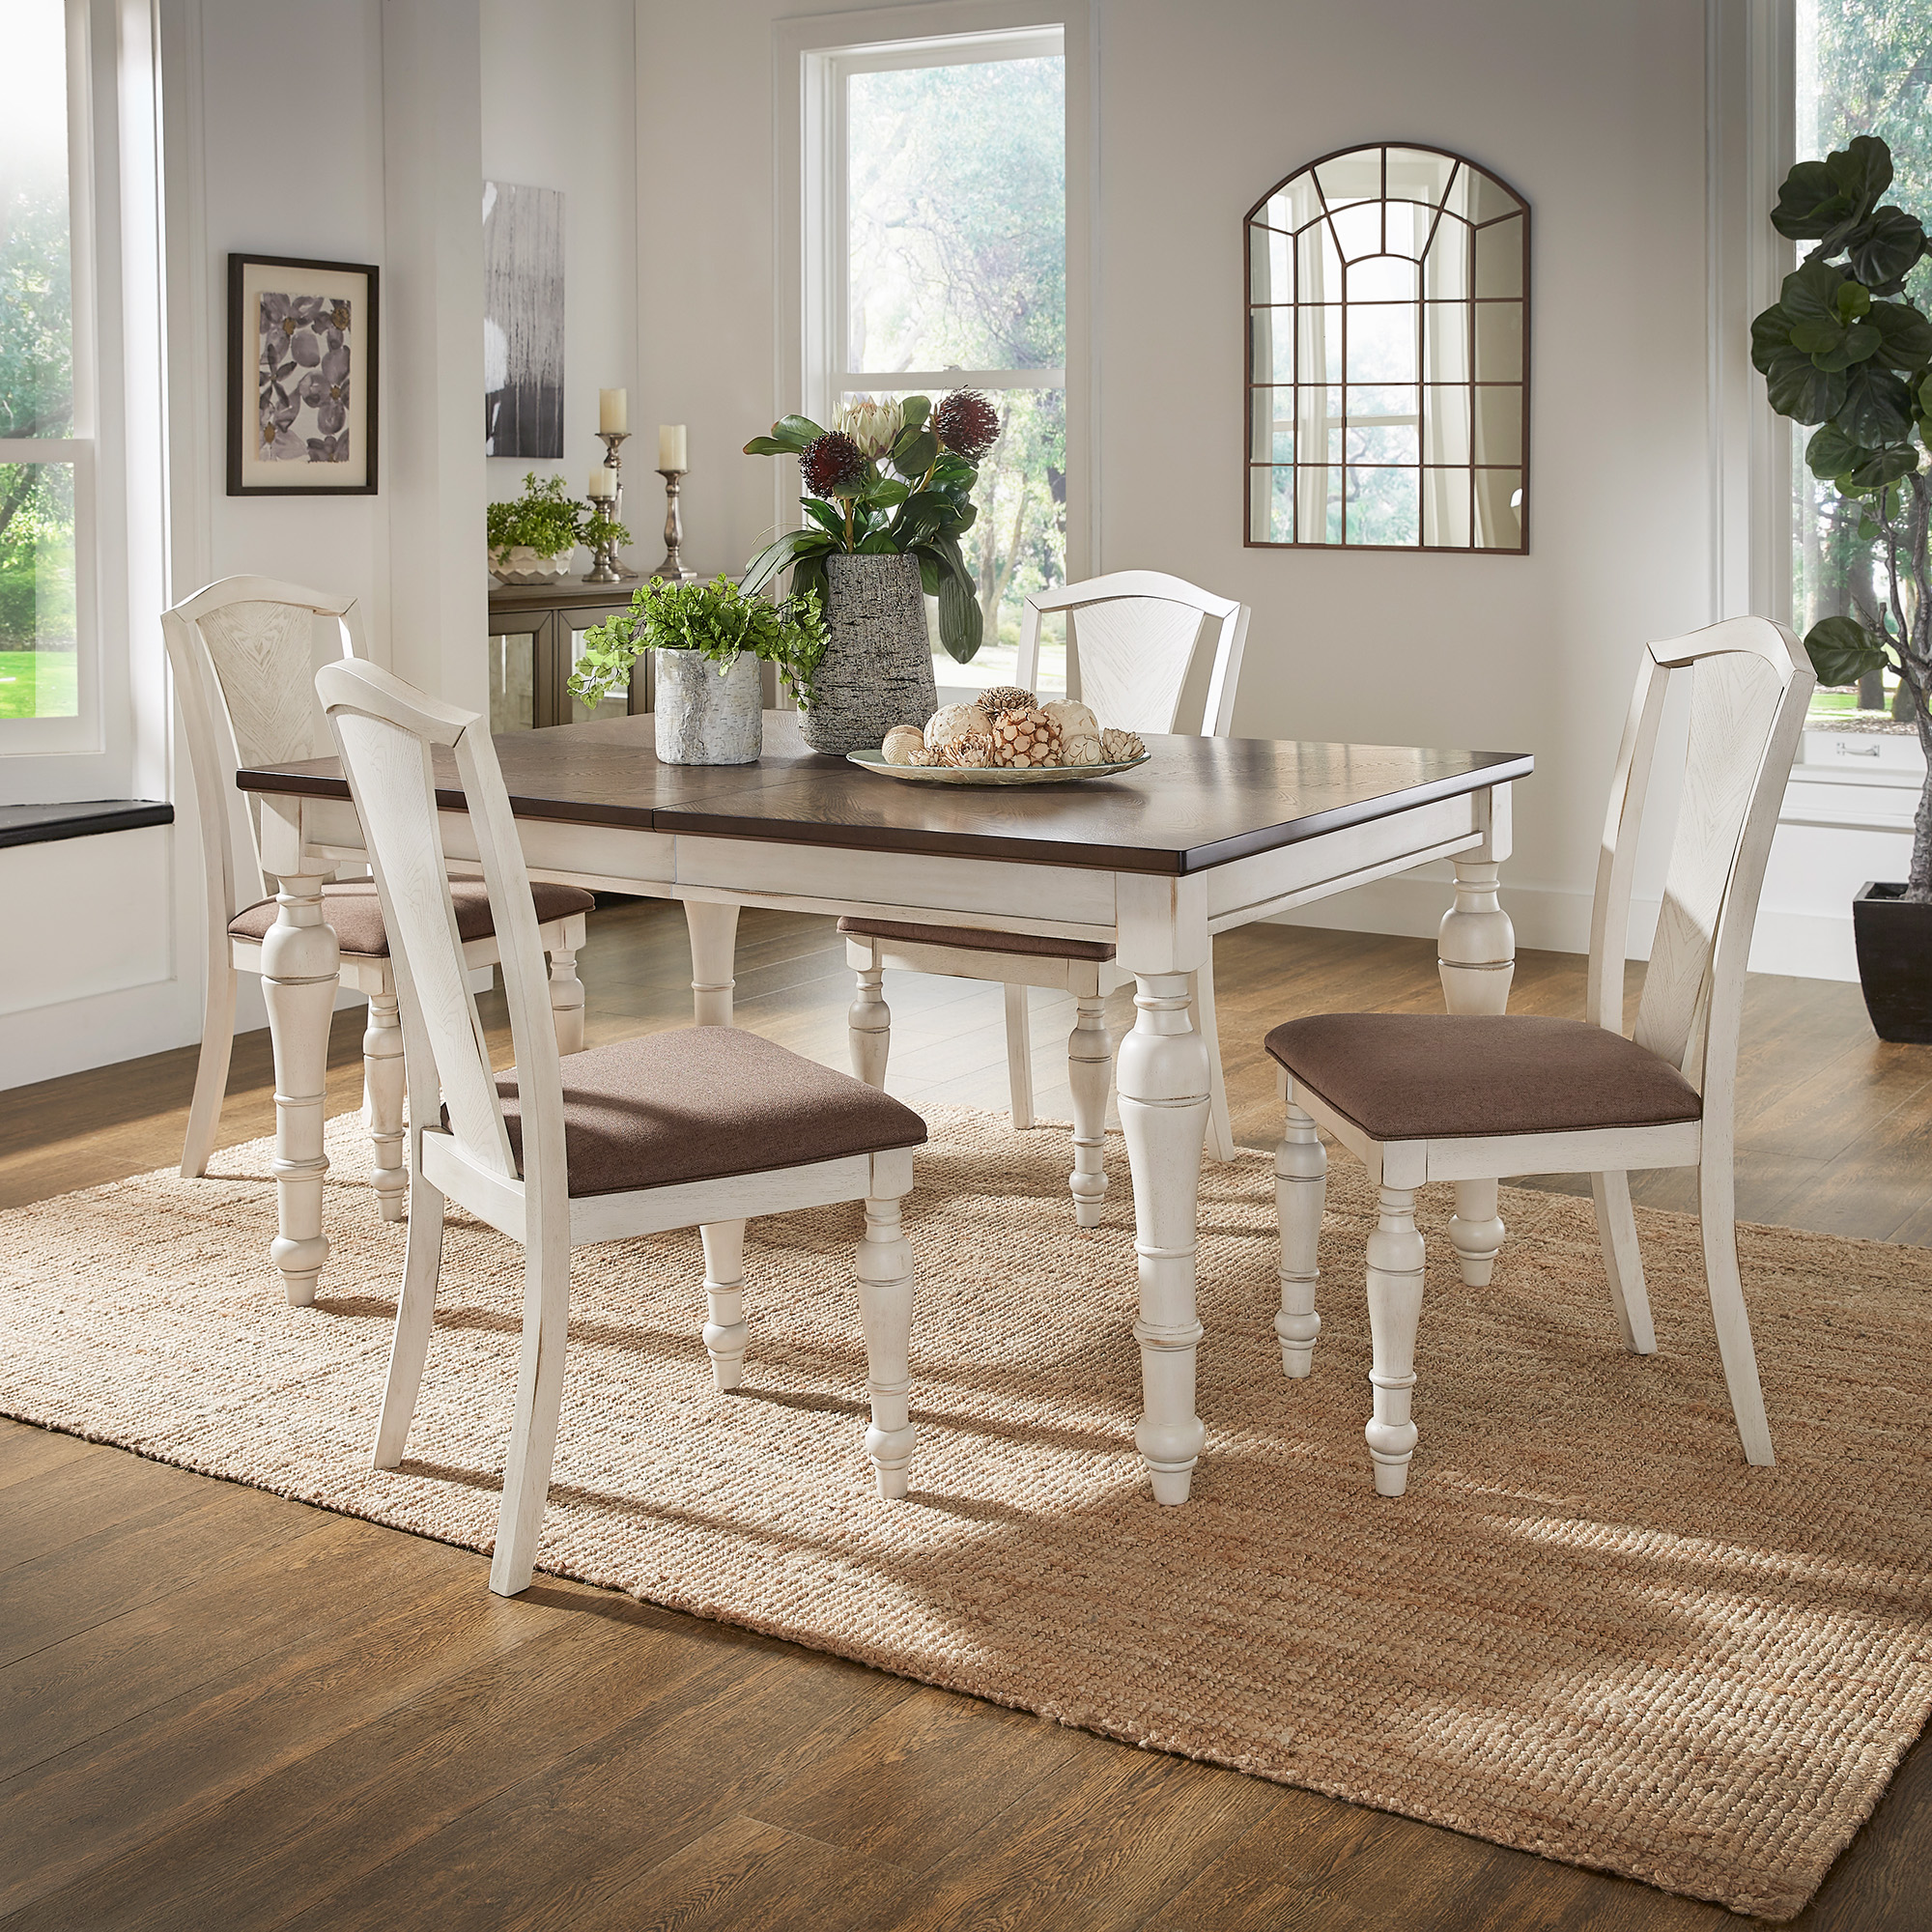 4-6-Person Extendable Solid Rubberwood Dining Table Set